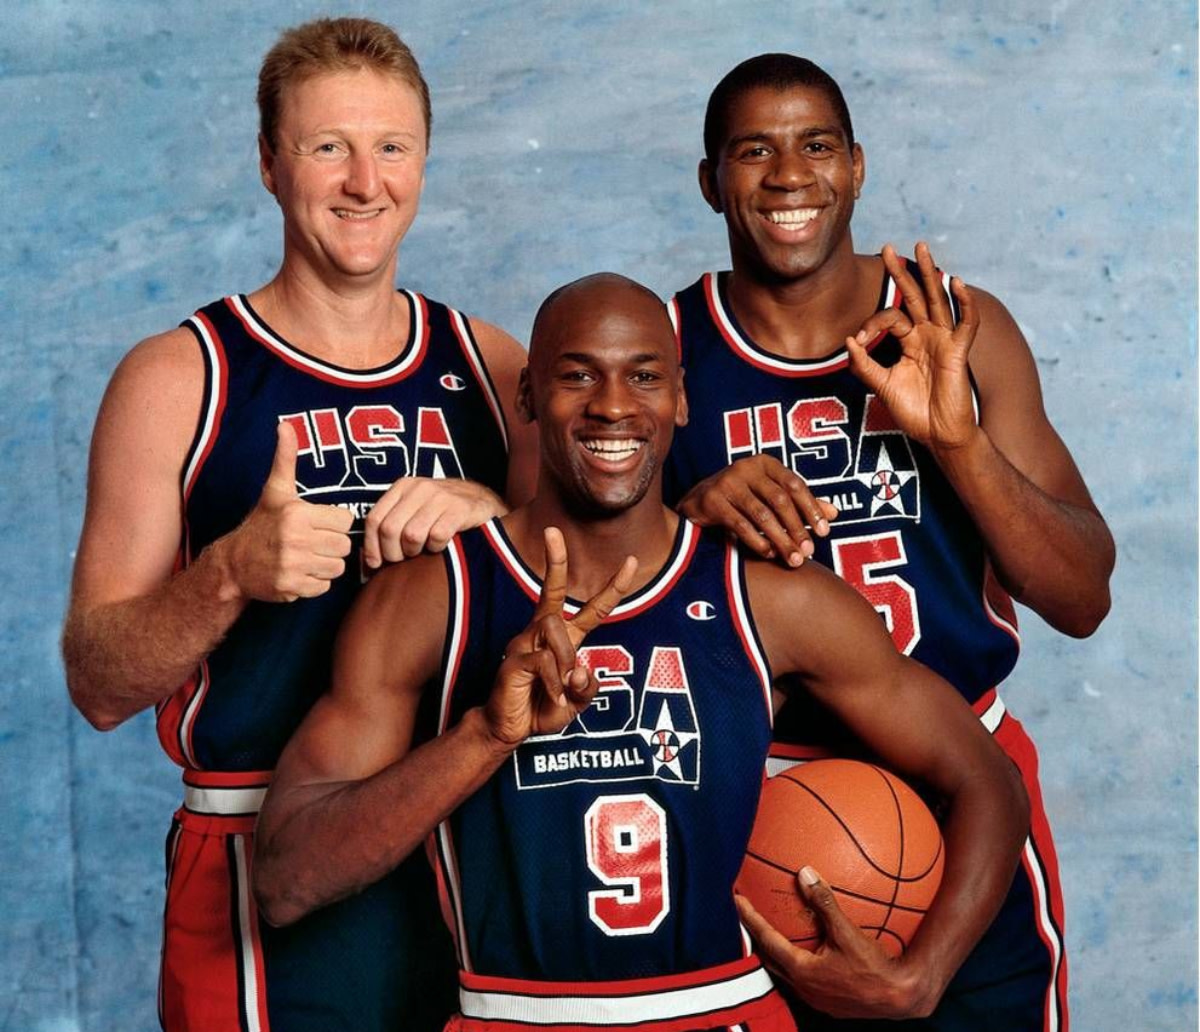 Michael Jordan On How He Got Closer To Magic Johnson And Larry Bird During The 1992 Olympics Run: "All The Competitive Conversations About Who's On Top... I Don't Know. We Just Seemed To Hit It Off."